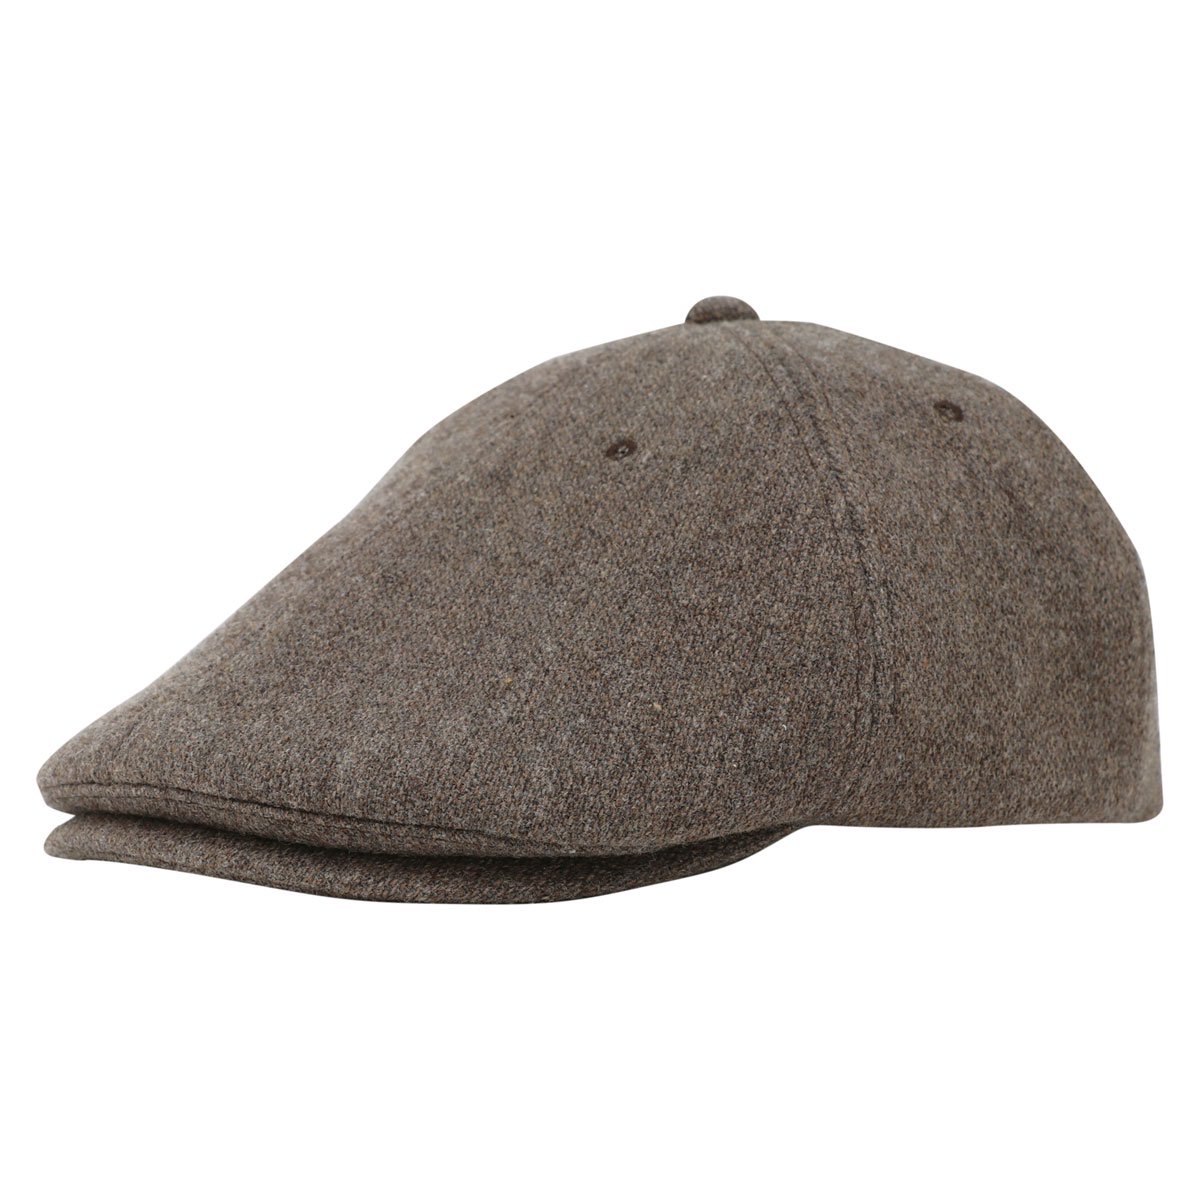 WHIMSY - WOOL SNAP BACK HUNTING - SHRED